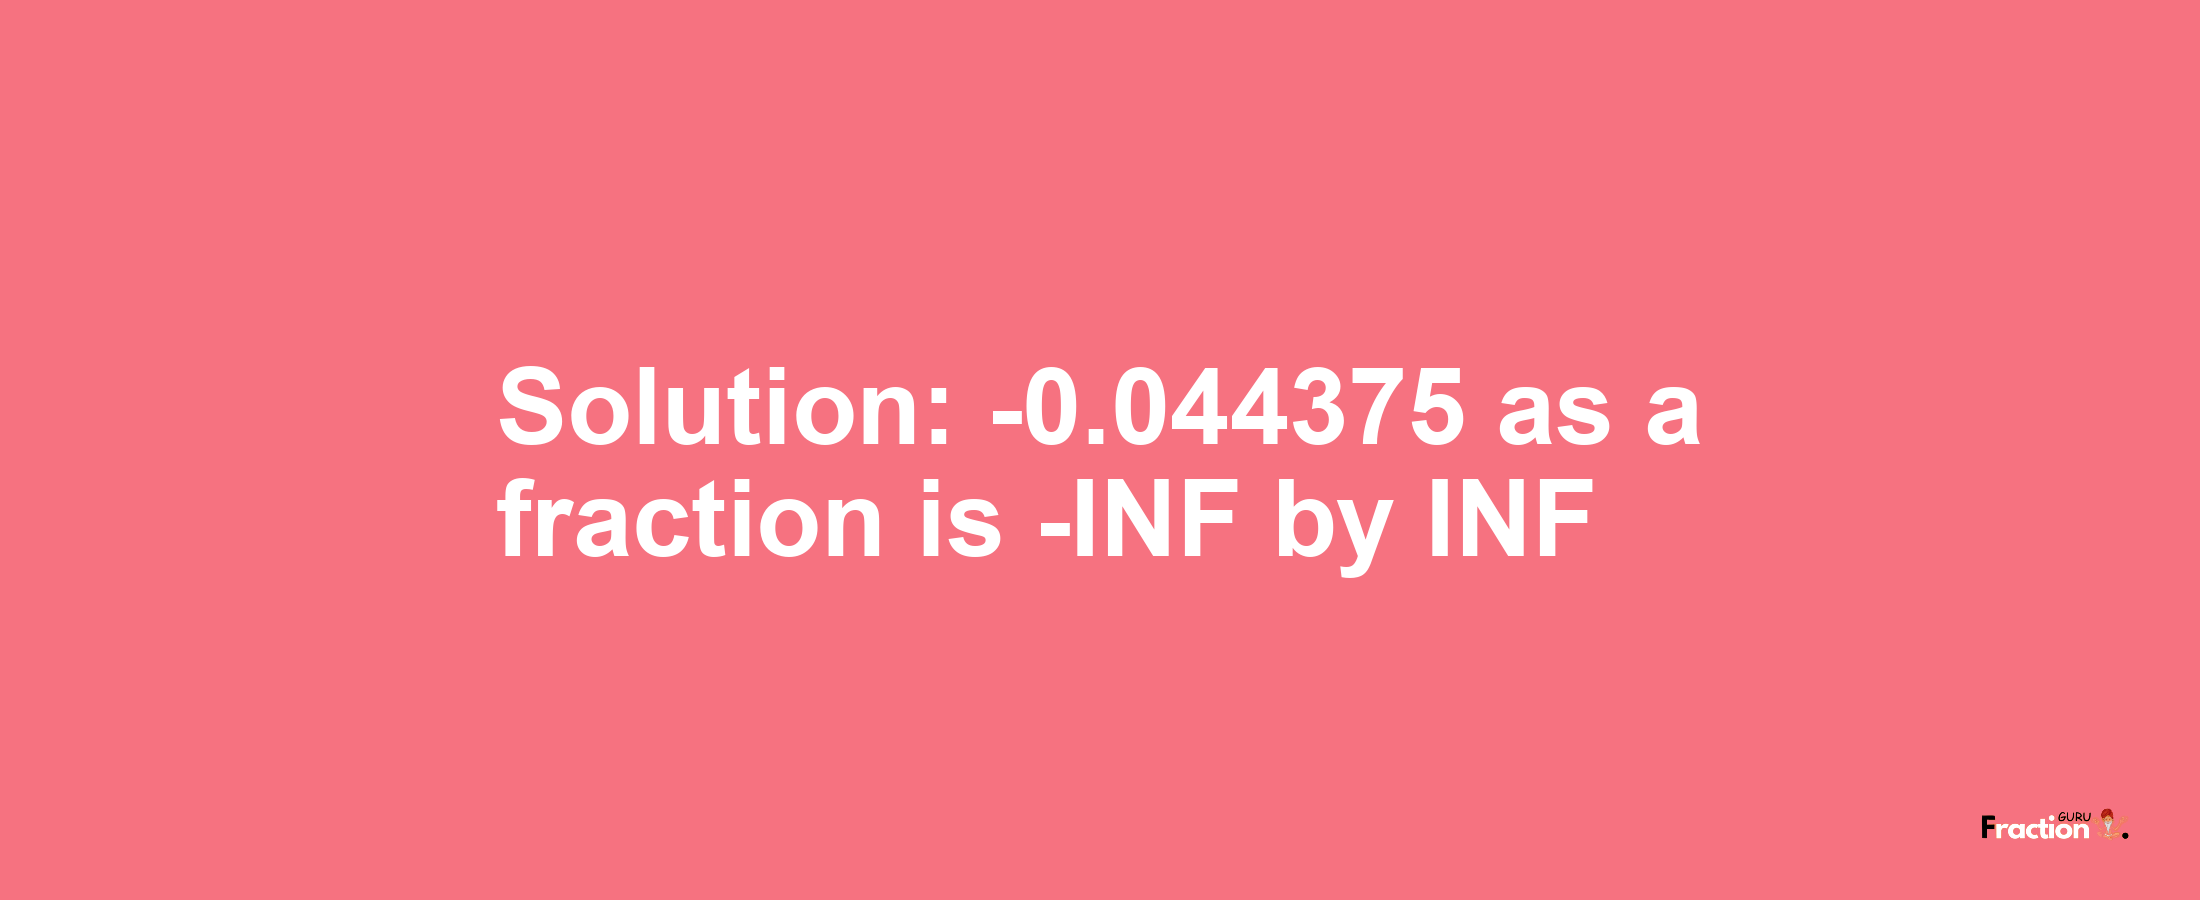 Solution:-0.044375 as a fraction is -INF/INF